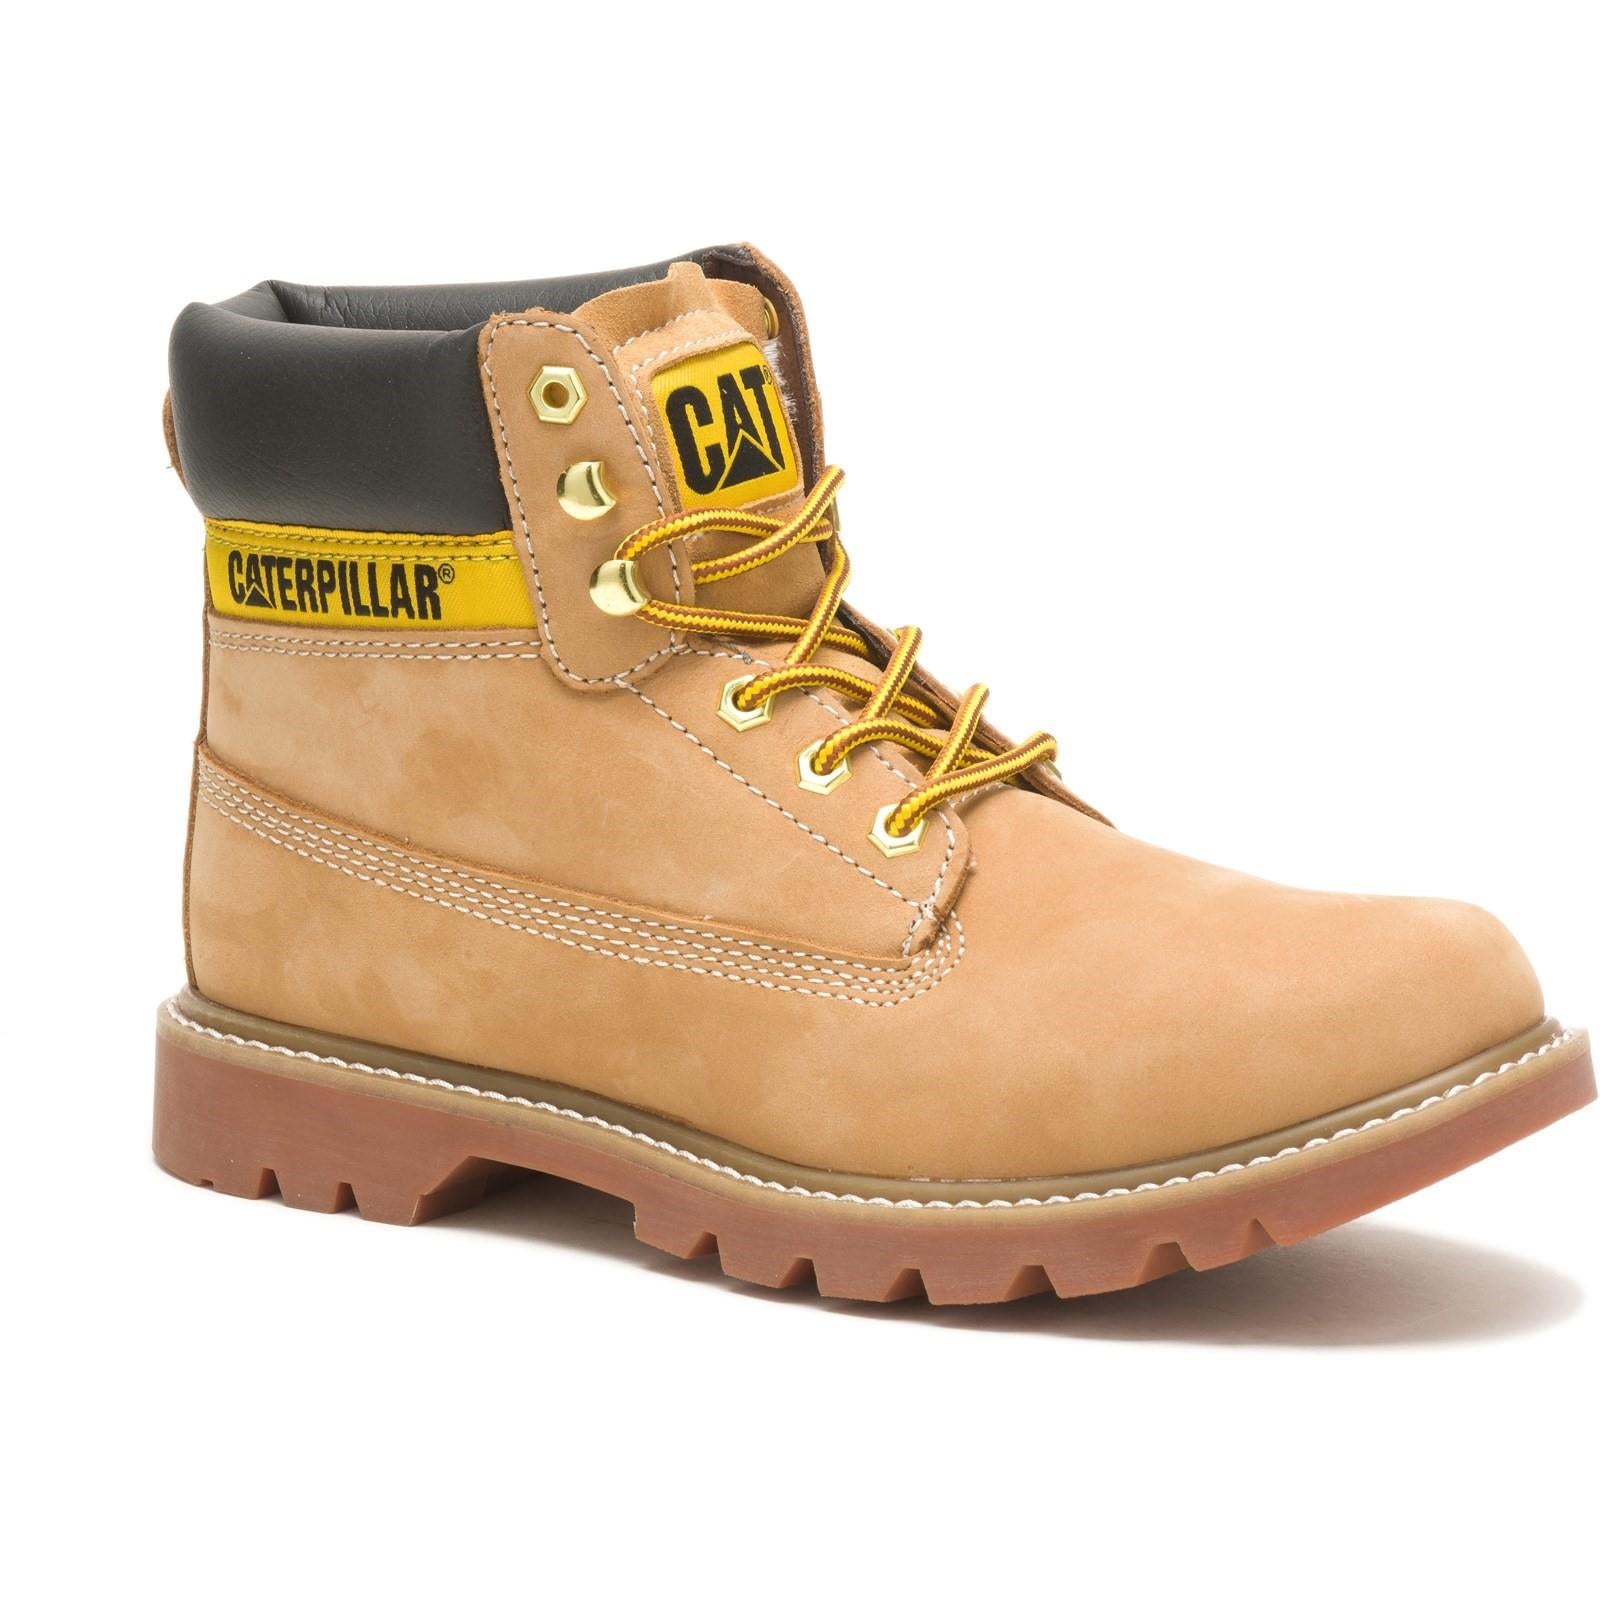 Caterpillar CAT Lifestyle Colorado 2.0 honey reset leather lace up boots